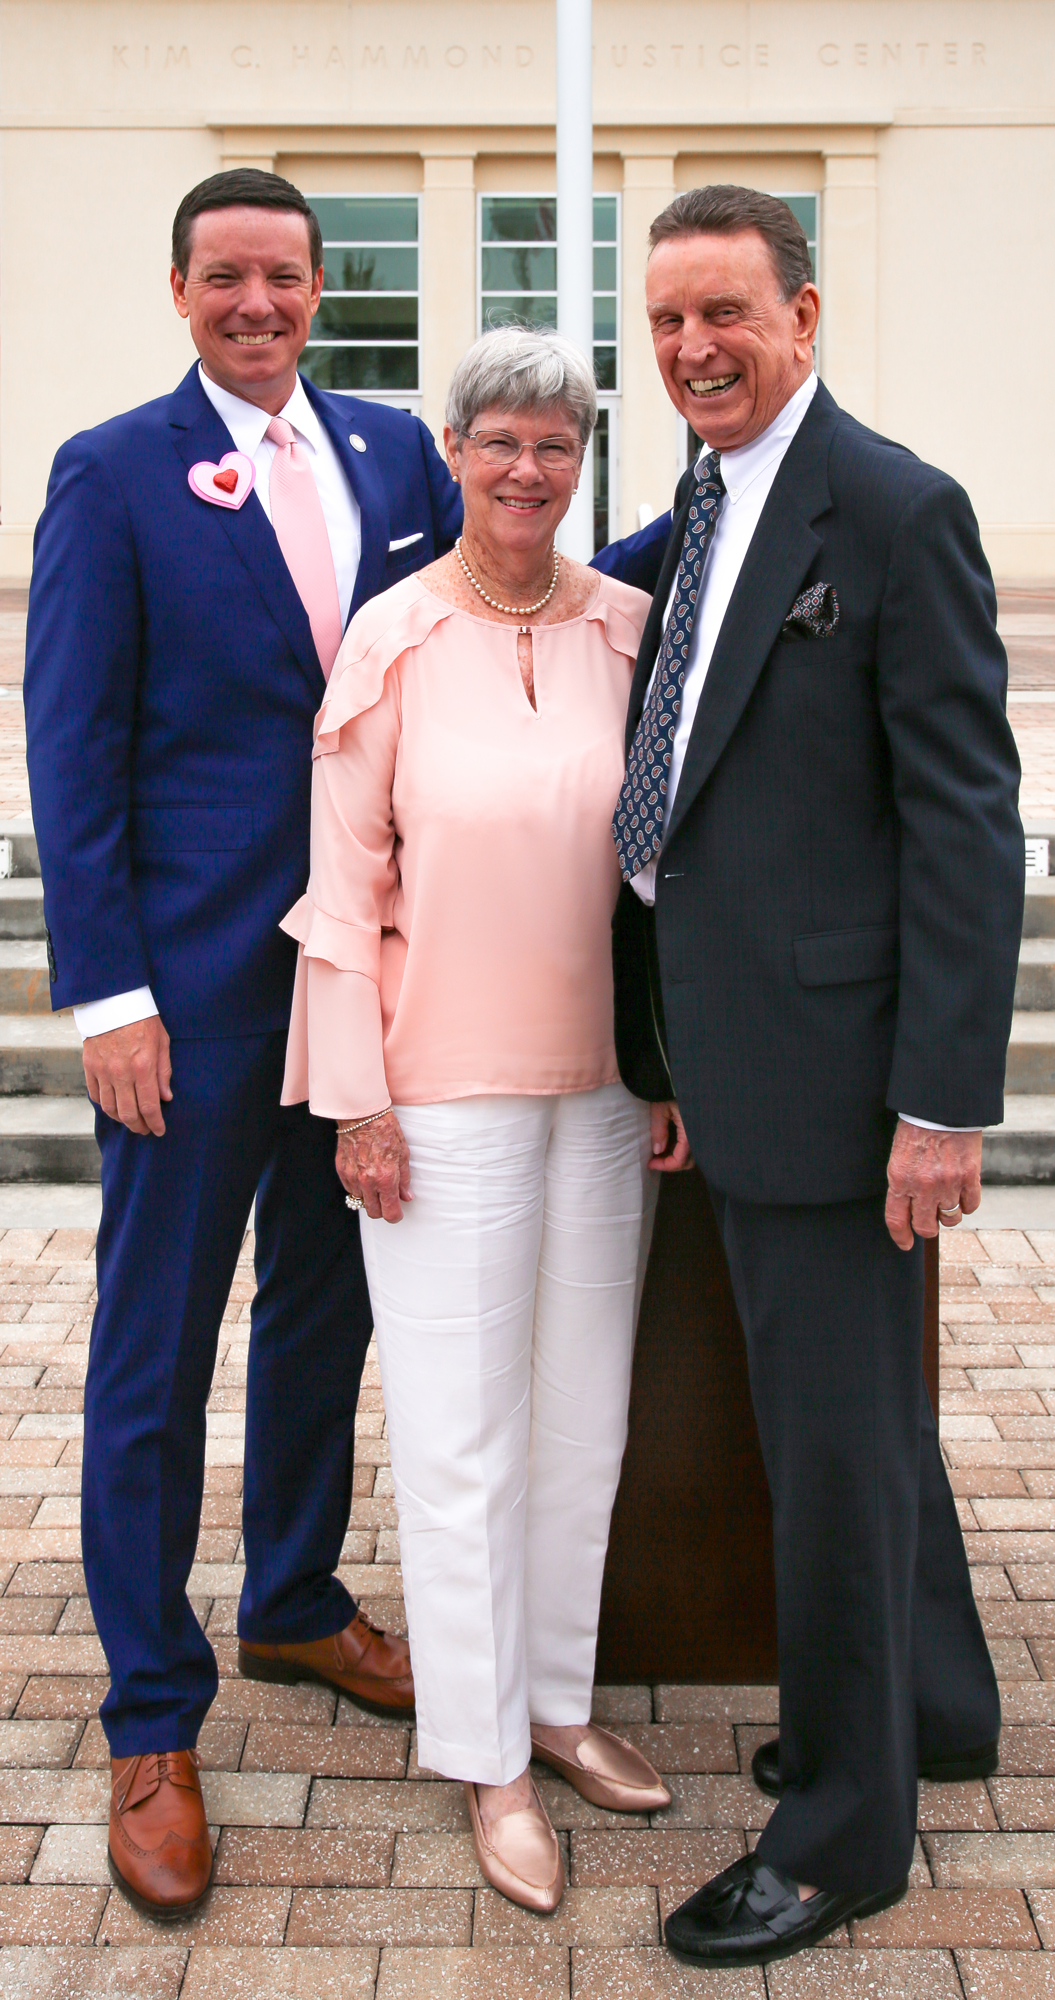 Clerk of the Circuit Court and Comptroller Tom Bexley  with his mother Carol Bexley and father Bill Bexley who renewed their vows at the Valentine’s Day ceremony.  Courtesy photo by Swayne Parsons of Firelight Photography